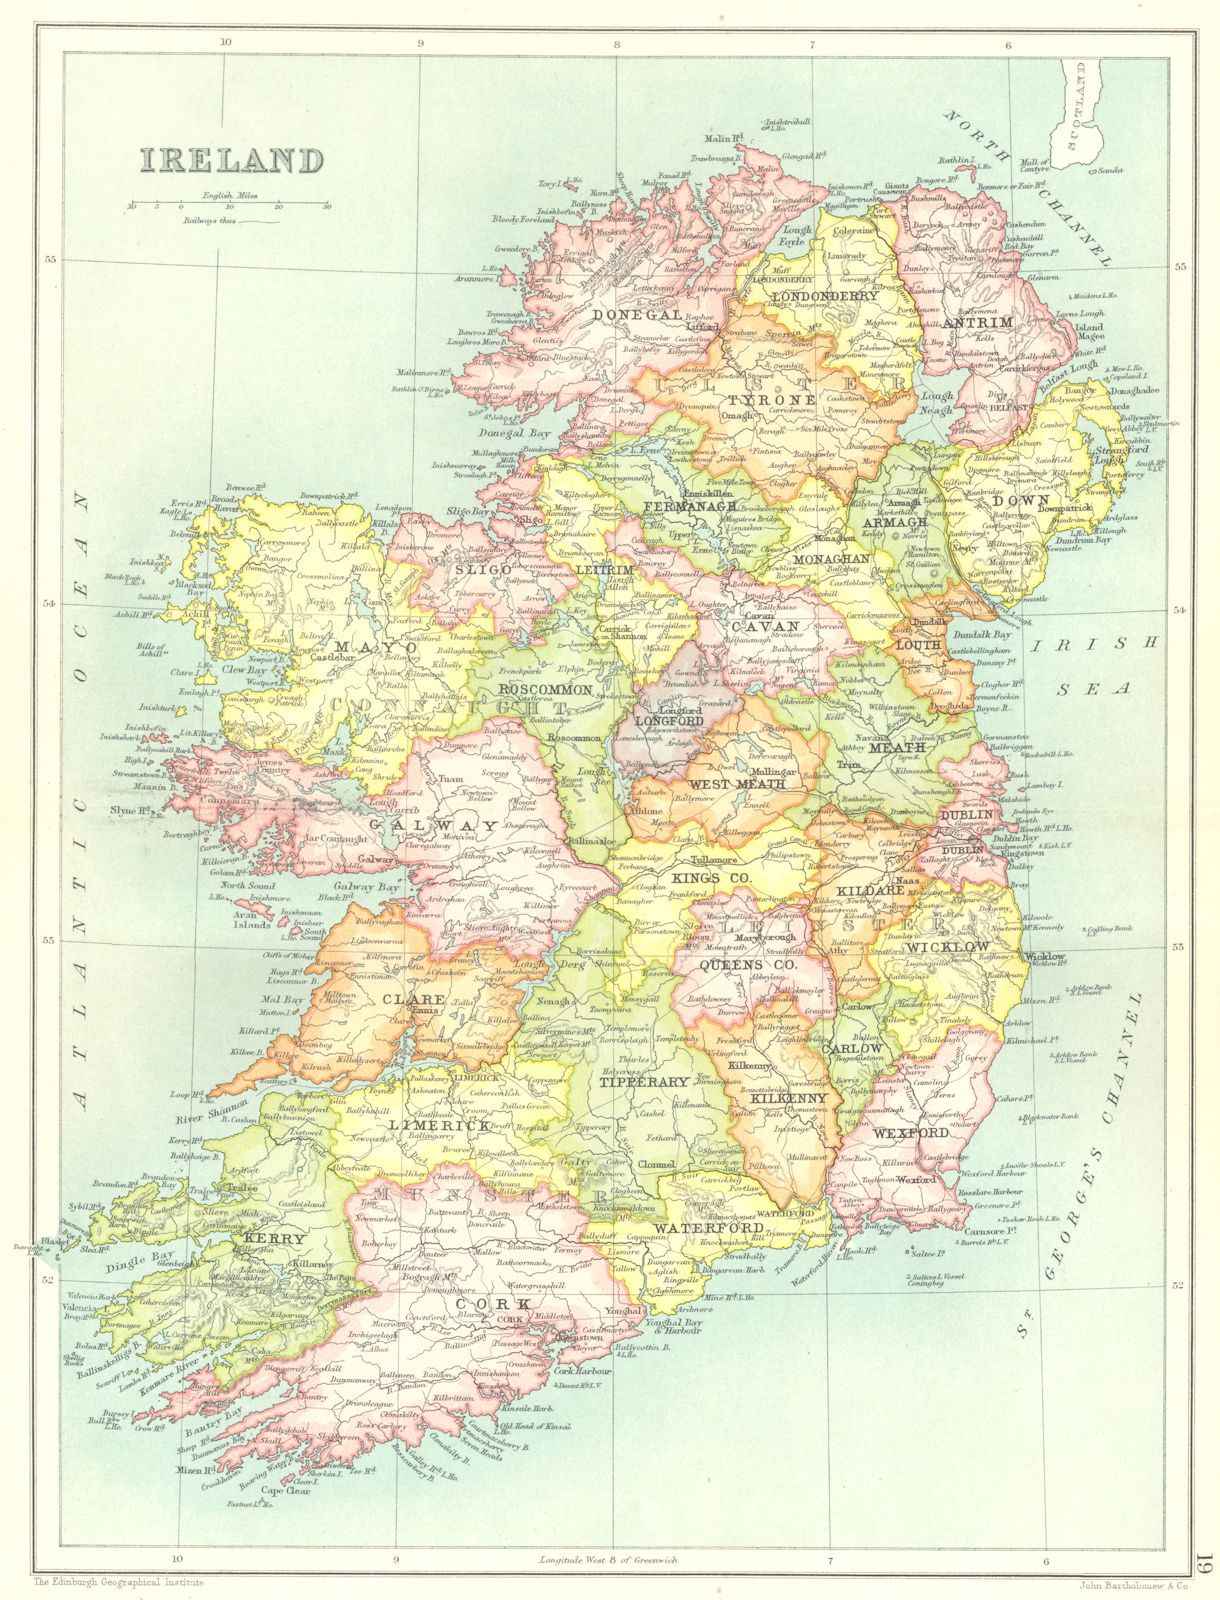 IRELAND. Showing counties. Cassells. 1909 old antique vintage map plan chart